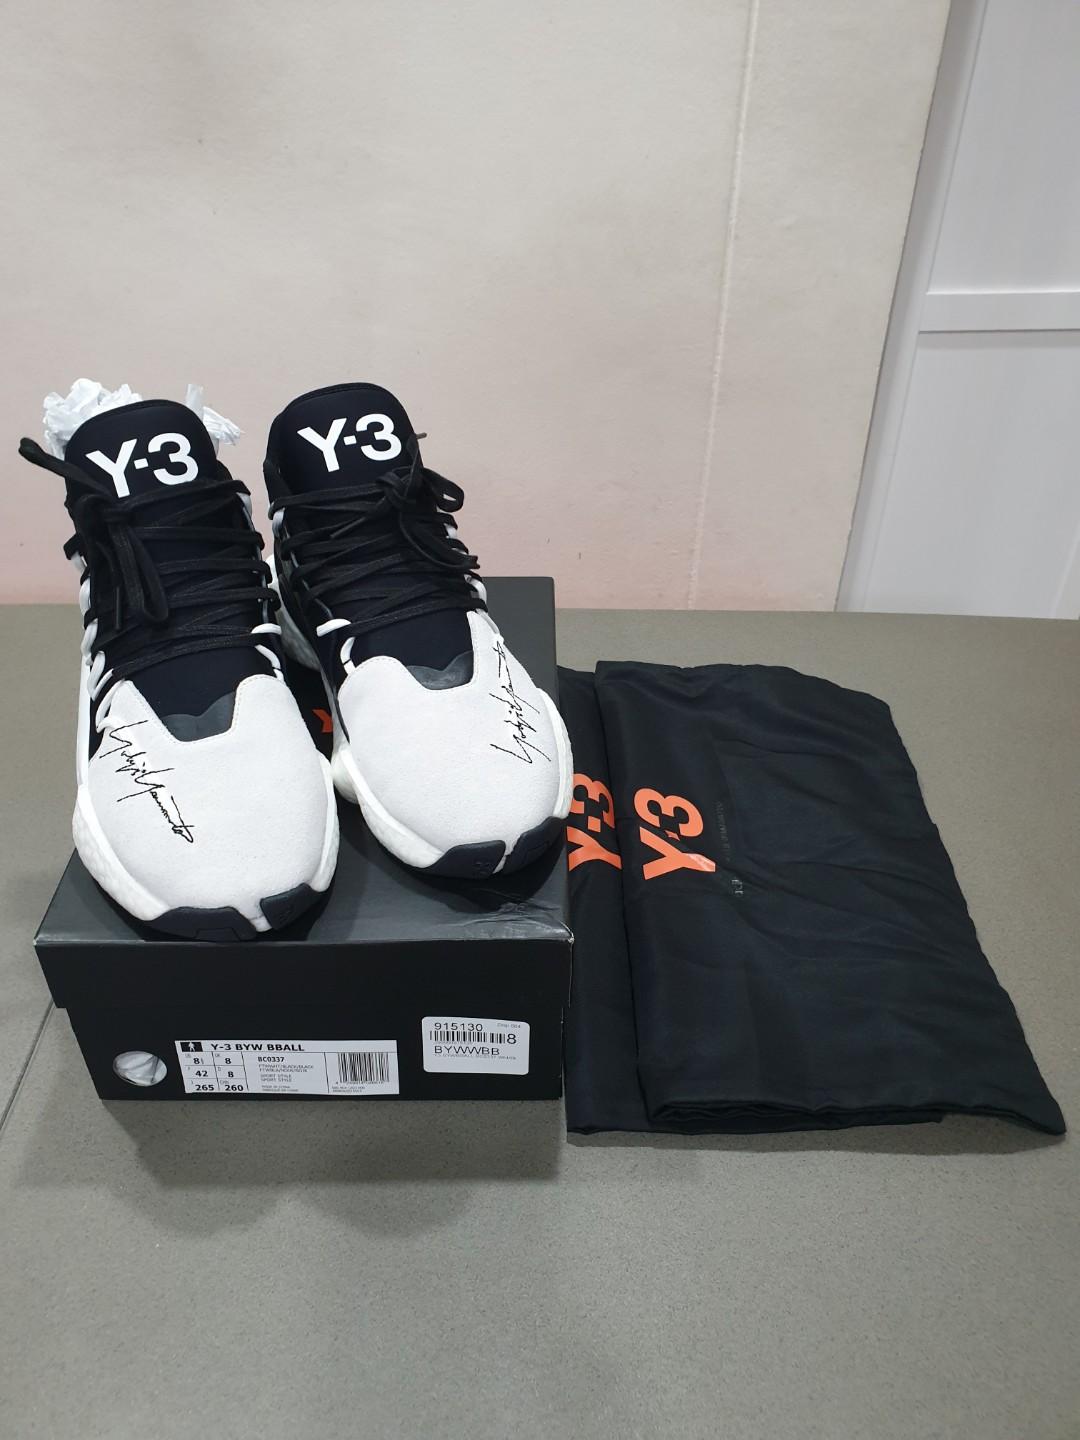 Clearance)Adidas Y3 Y-3 James Harden BYW bball Black/White, Men's Fashion,  Footwear, Sneakers on Carousell